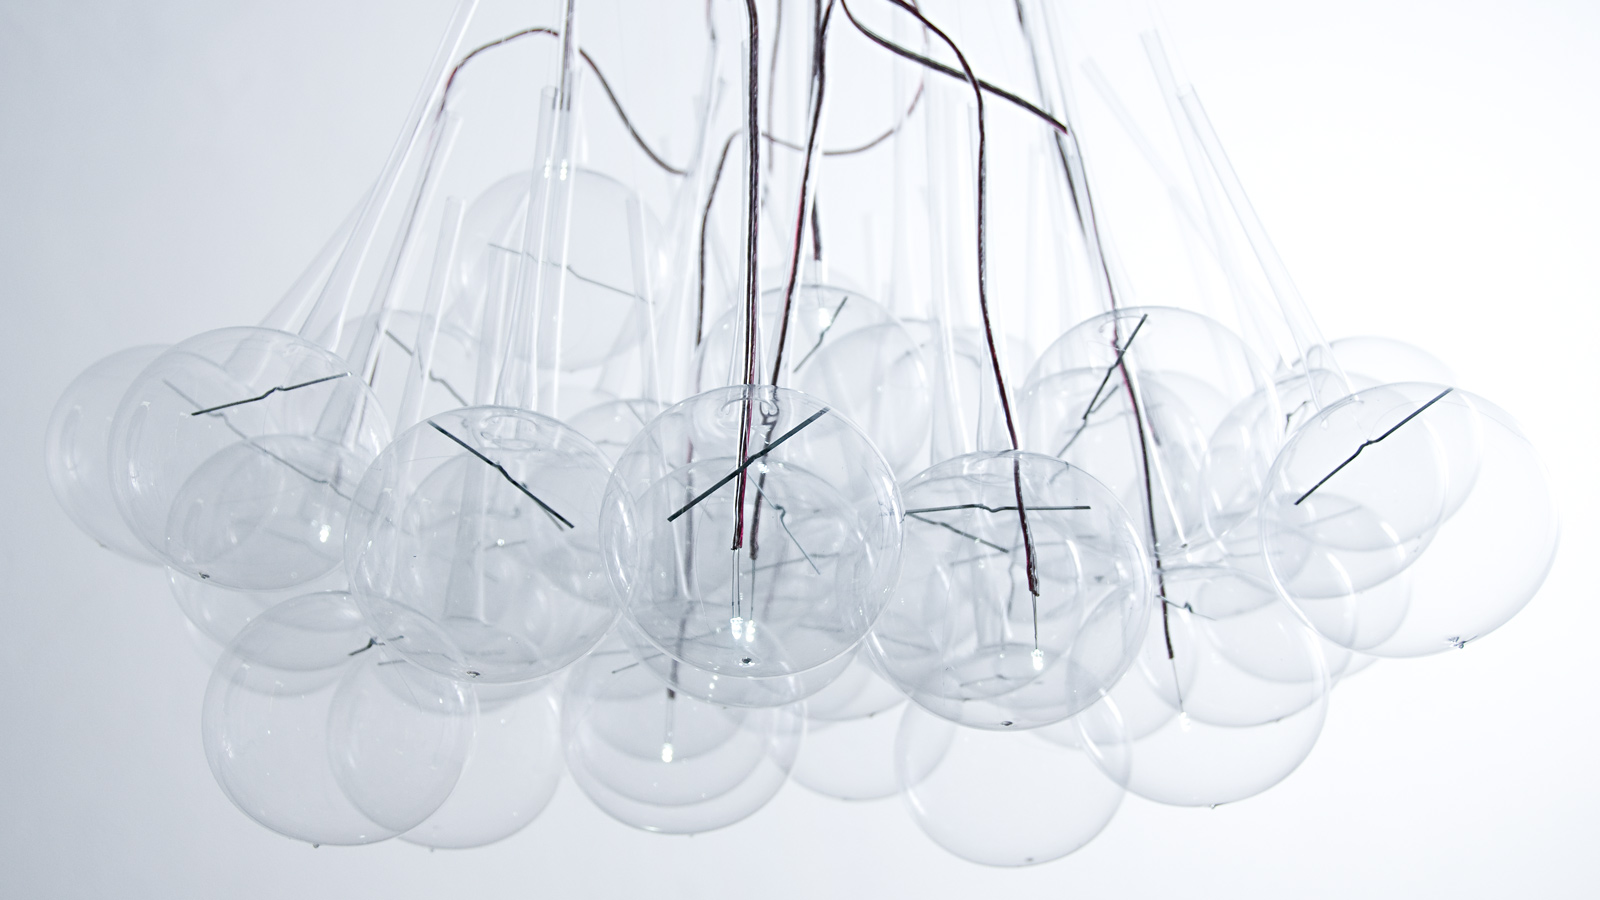 CUMULUS MAXIMUS is luxurious object made from fragile, hand-formed glass bulbs